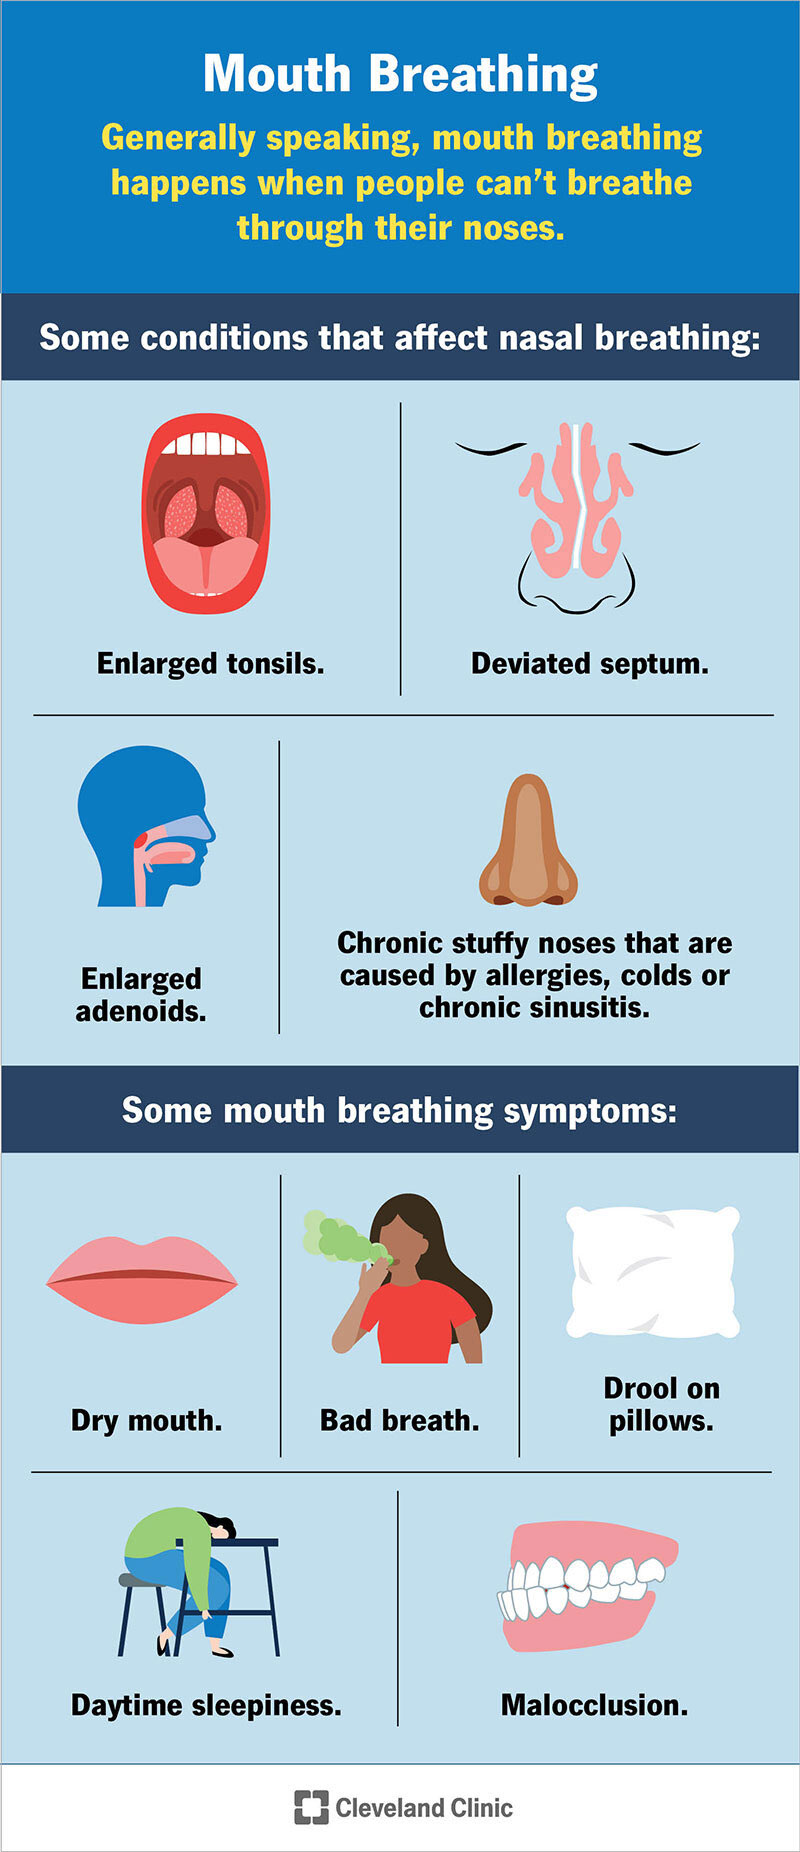 Mouth breathing causes top row left hand side: Enlarged tonsils and deviated septum. Second row left hand side: Enlarged adenoids and chronic stuffy nose from allergies, colds or chronic sinusitis. Mouth breathing symptoms top row left hand side: Dry mouth, bad breath and drool on pillow. Second row left hand side: Daytime sleepiness and malocclusion.